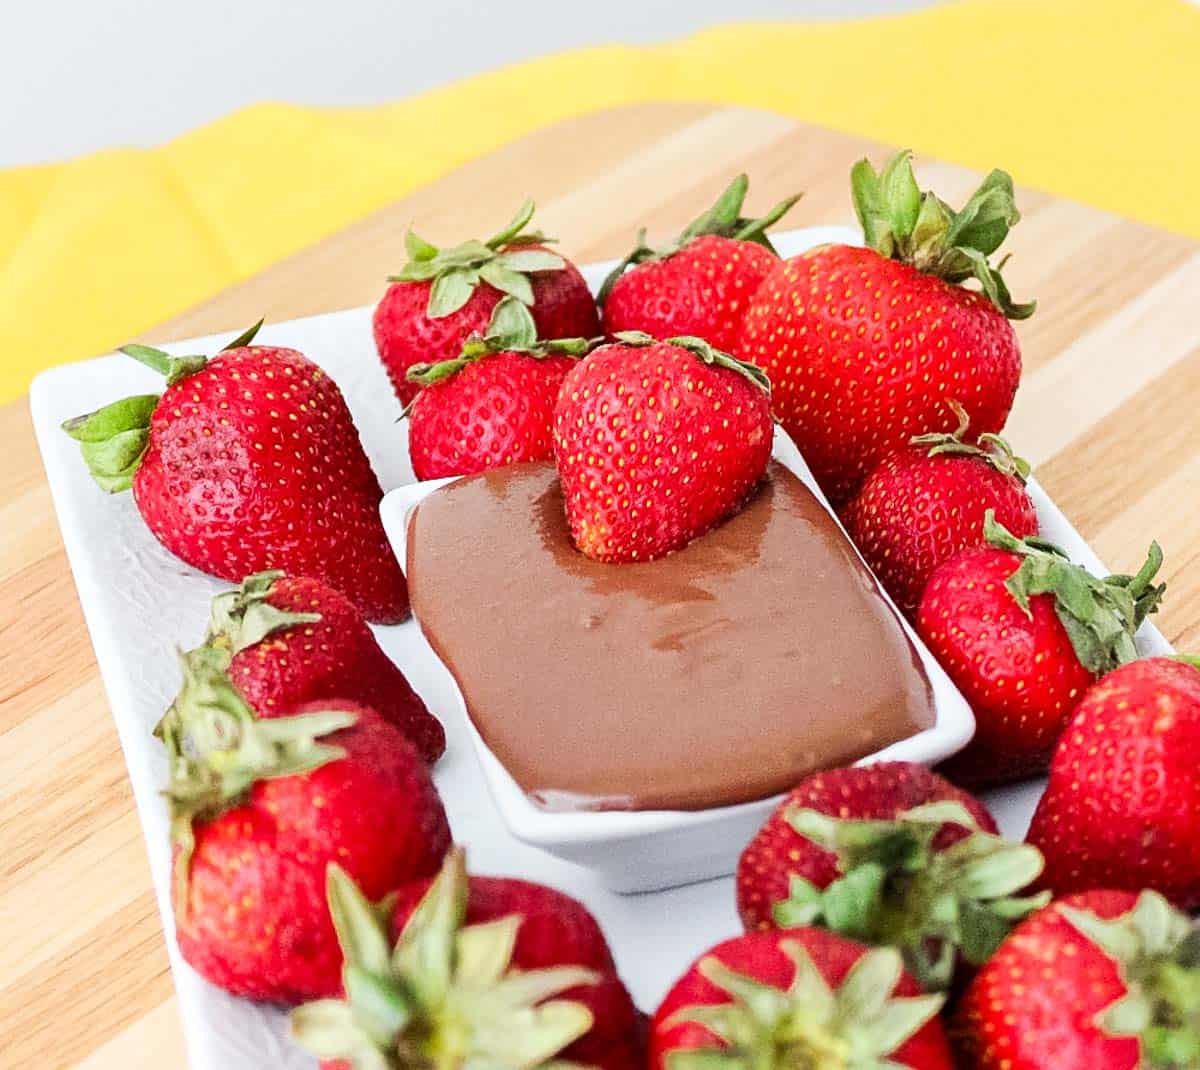 plate of fresh strawberries with a bowl of chocolate sauce and a strawberry dipping into the sauce.